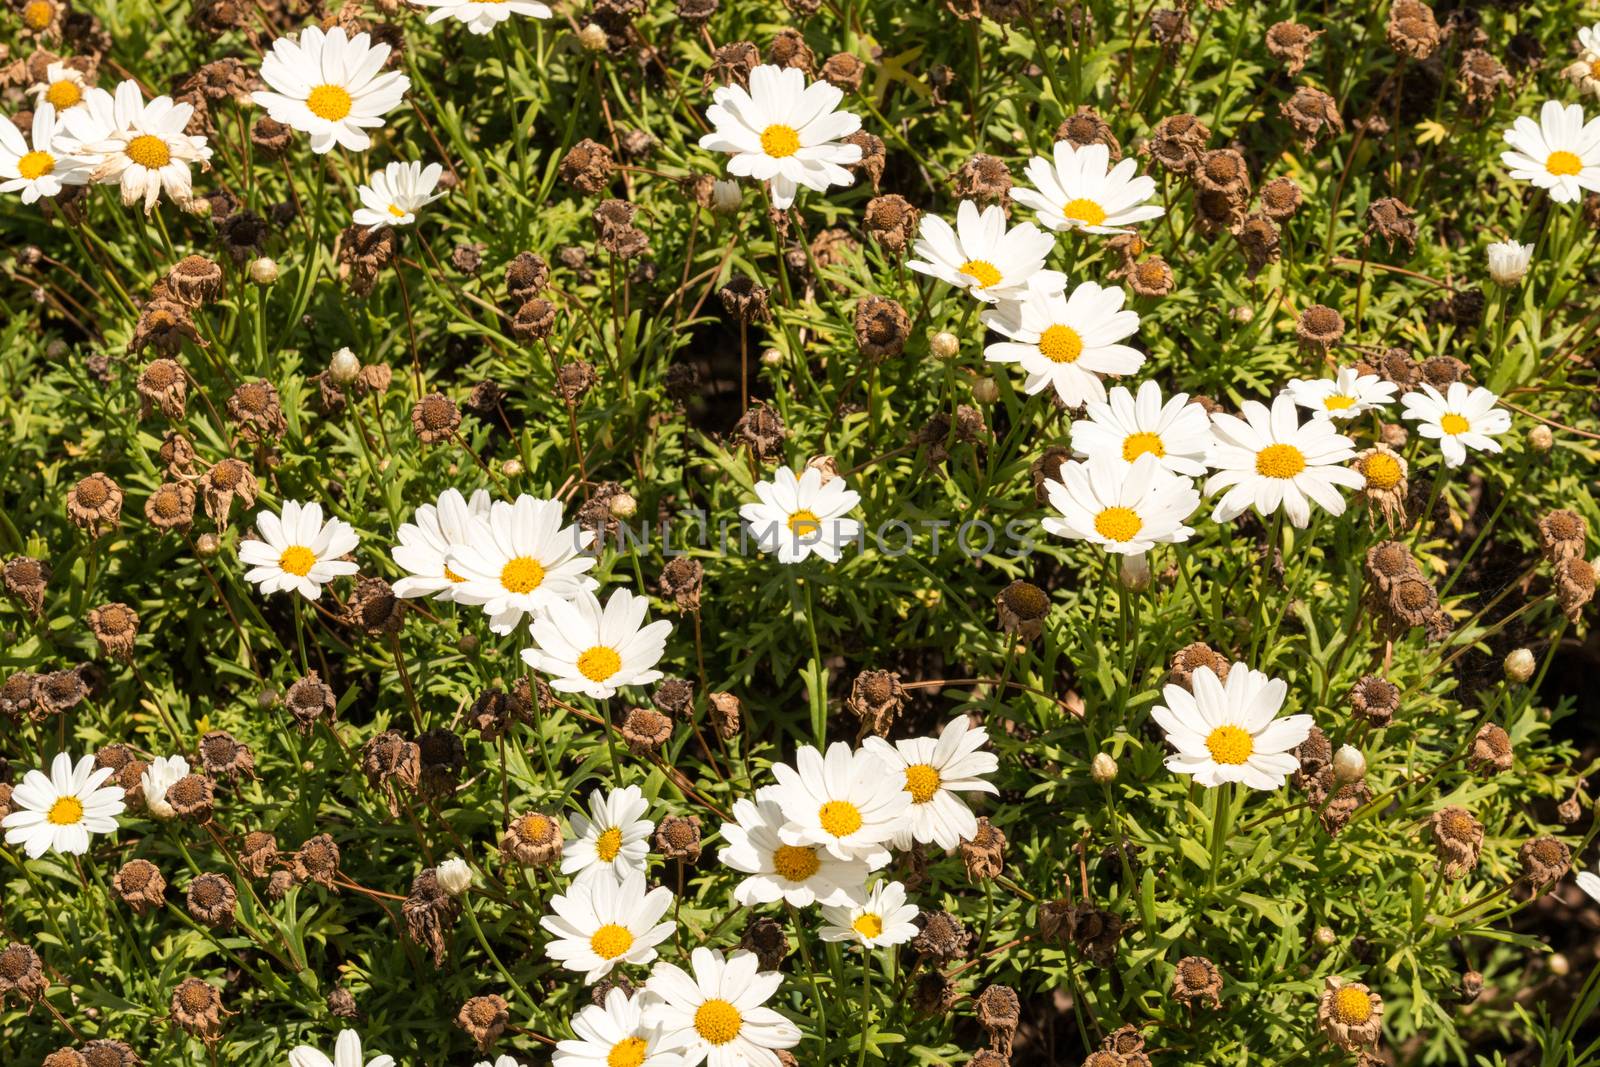 daisies in a field in spring time